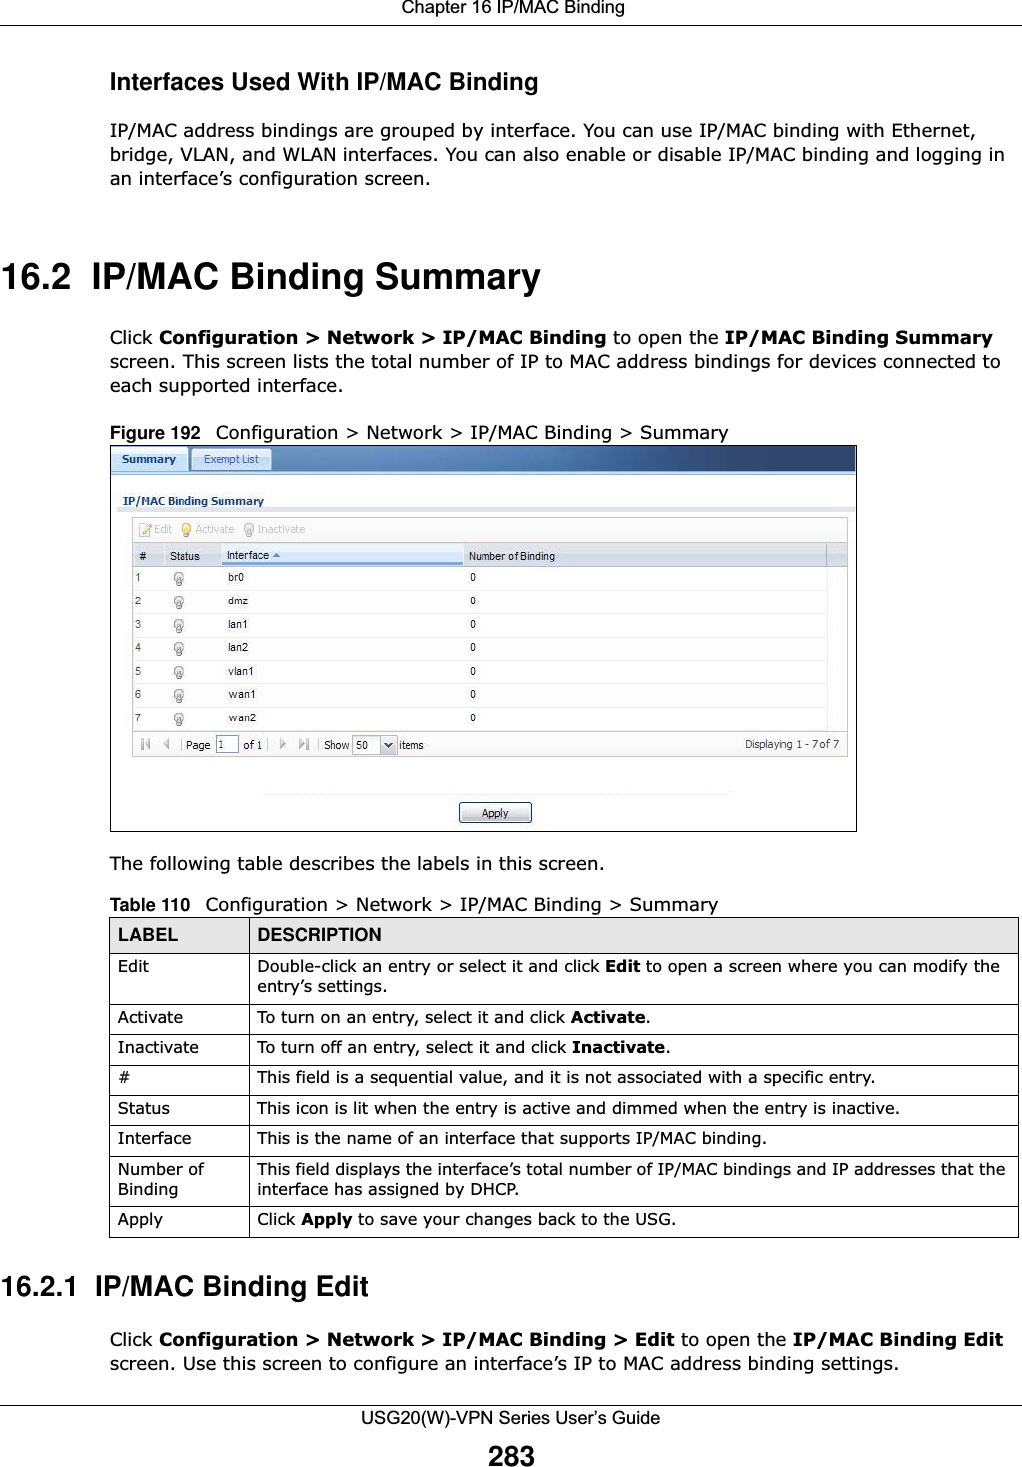  Chapter 16 IP/MAC BindingUSG20(W)-VPN Series User’s Guide283Interfaces Used With IP/MAC BindingIP/MAC address bindings are grouped by interface. You can use IP/MAC binding with Ethernet, bridge, VLAN, and WLAN interfaces. You can also enable or disable IP/MAC binding and logging in an interface’s configuration screen.16.2  IP/MAC Binding SummaryClick Configuration &gt; Network &gt; IP/MAC Binding to open the IP/MAC Binding Summary screen. This screen lists the total number of IP to MAC address bindings for devices connected to each supported interface.Figure 192   Configuration &gt; Network &gt; IP/MAC Binding &gt; Summary The following table describes the labels in this screen.  16.2.1  IP/MAC Binding EditClick Configuration &gt; Network &gt; IP/MAC Binding &gt; Edit to open the IP/MAC Binding Edit screen. Use this screen to configure an interface’s IP to MAC address binding settings. Table 110   Configuration &gt; Network &gt; IP/MAC Binding &gt; Summary LABEL DESCRIPTIONEdit Double-click an entry or select it and click Edit to open a screen where you can modify the entry’s settings. Activate To turn on an entry, select it and click Activate.Inactivate To turn off an entry, select it and click Inactivate.# This field is a sequential value, and it is not associated with a specific entry.Status This icon is lit when the entry is active and dimmed when the entry is inactive.Interface This is the name of an interface that supports IP/MAC binding.Number of BindingThis field displays the interface’s total number of IP/MAC bindings and IP addresses that the interface has assigned by DHCP. Apply Click Apply to save your changes back to the USG.